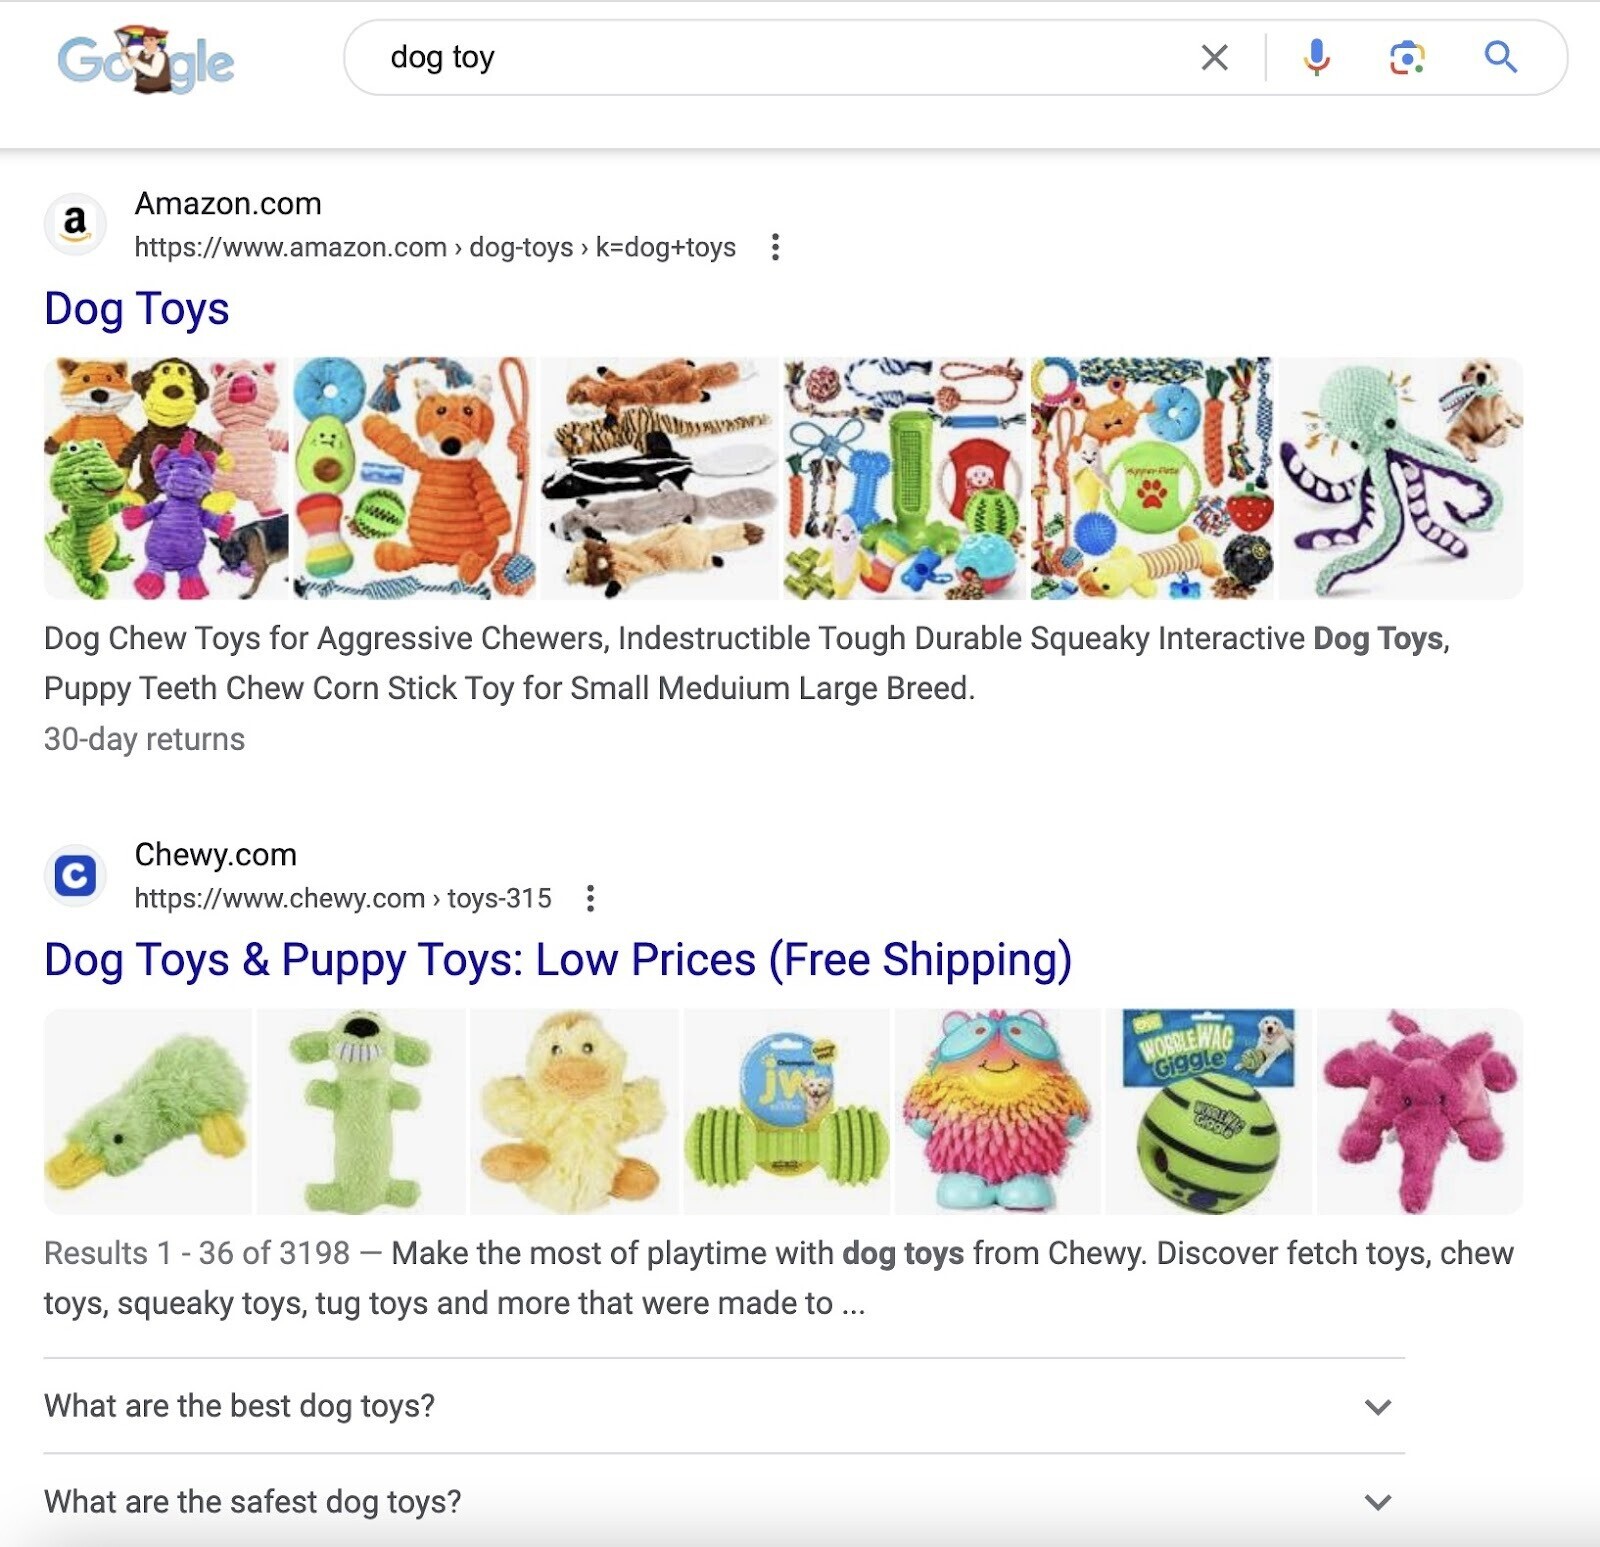 Google results for a “dog toy” search